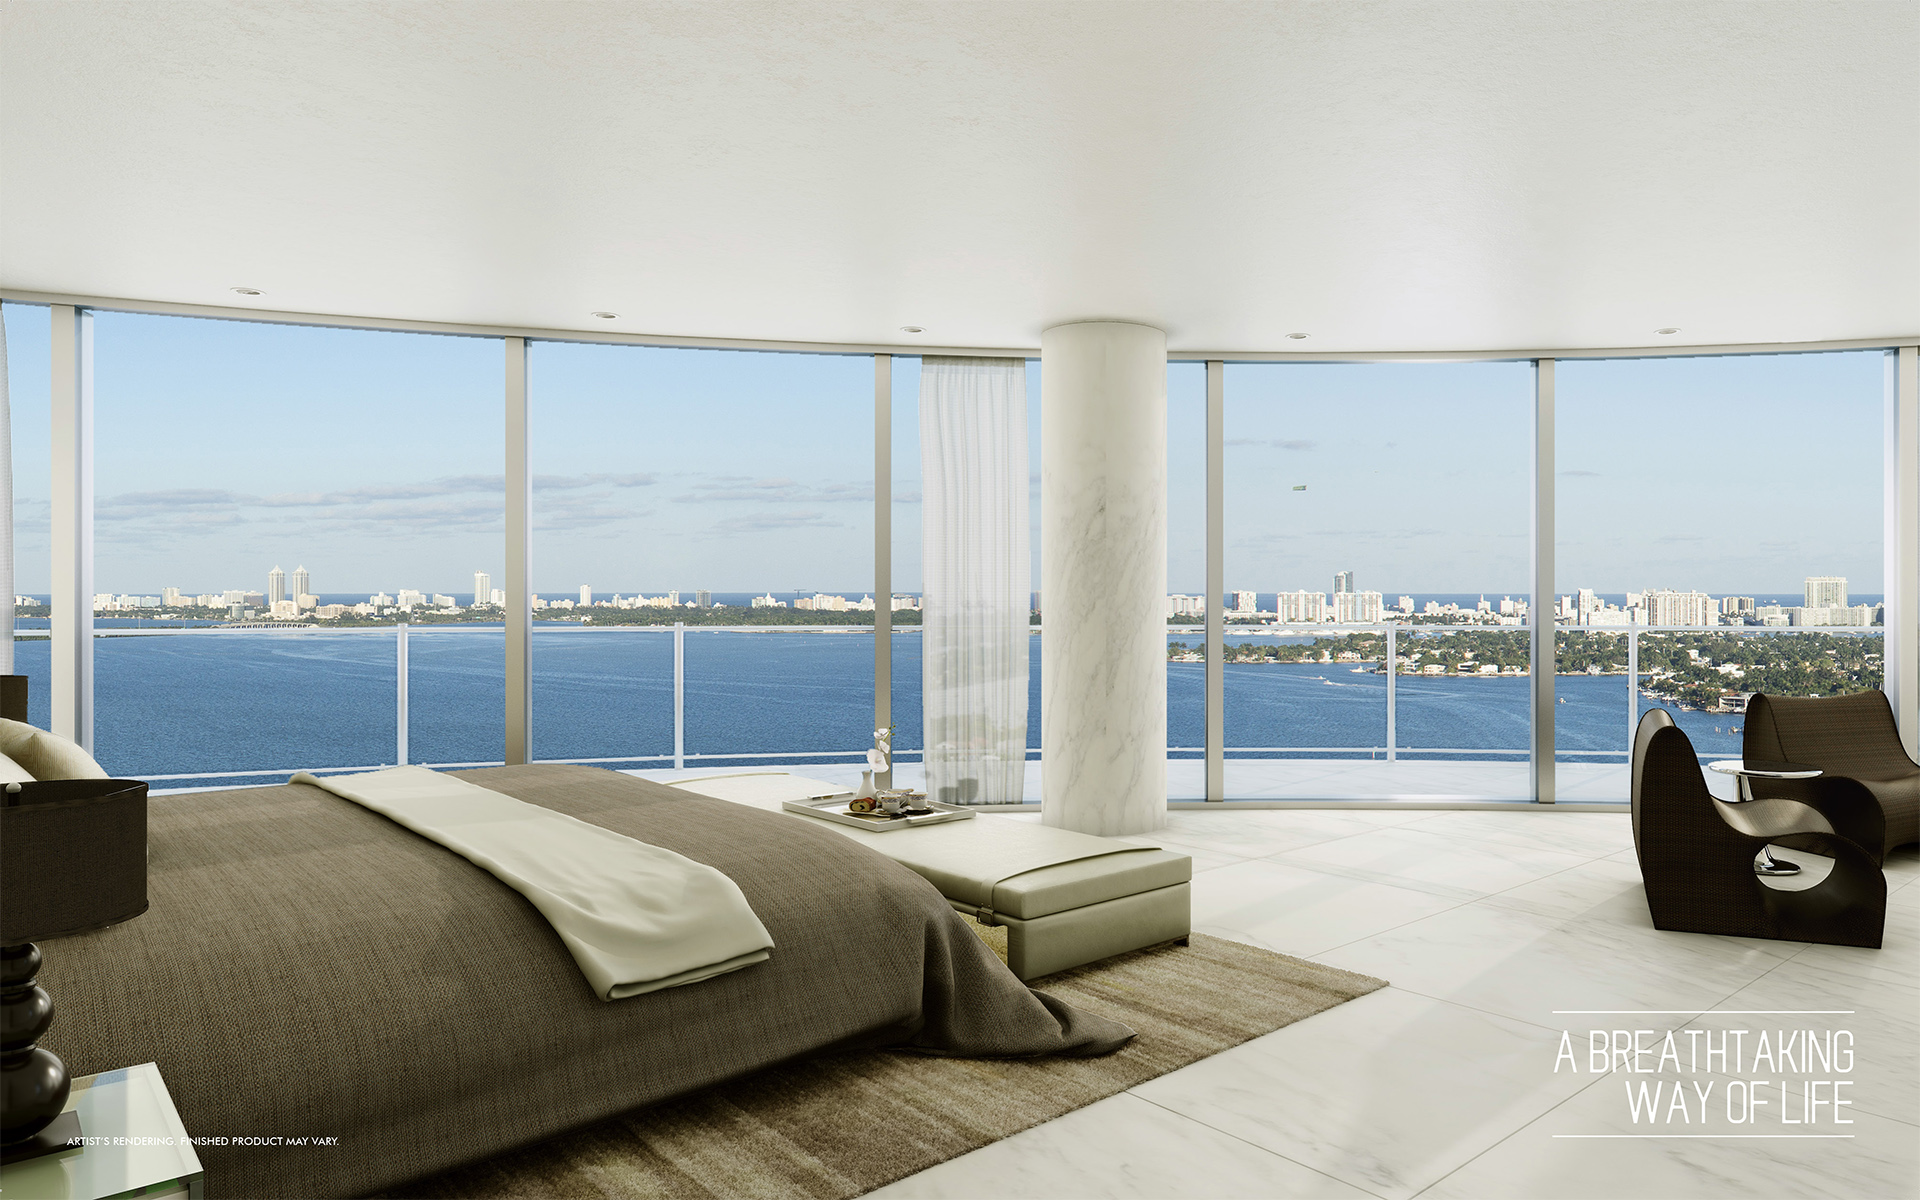 Miami indulges its residents with luxury living